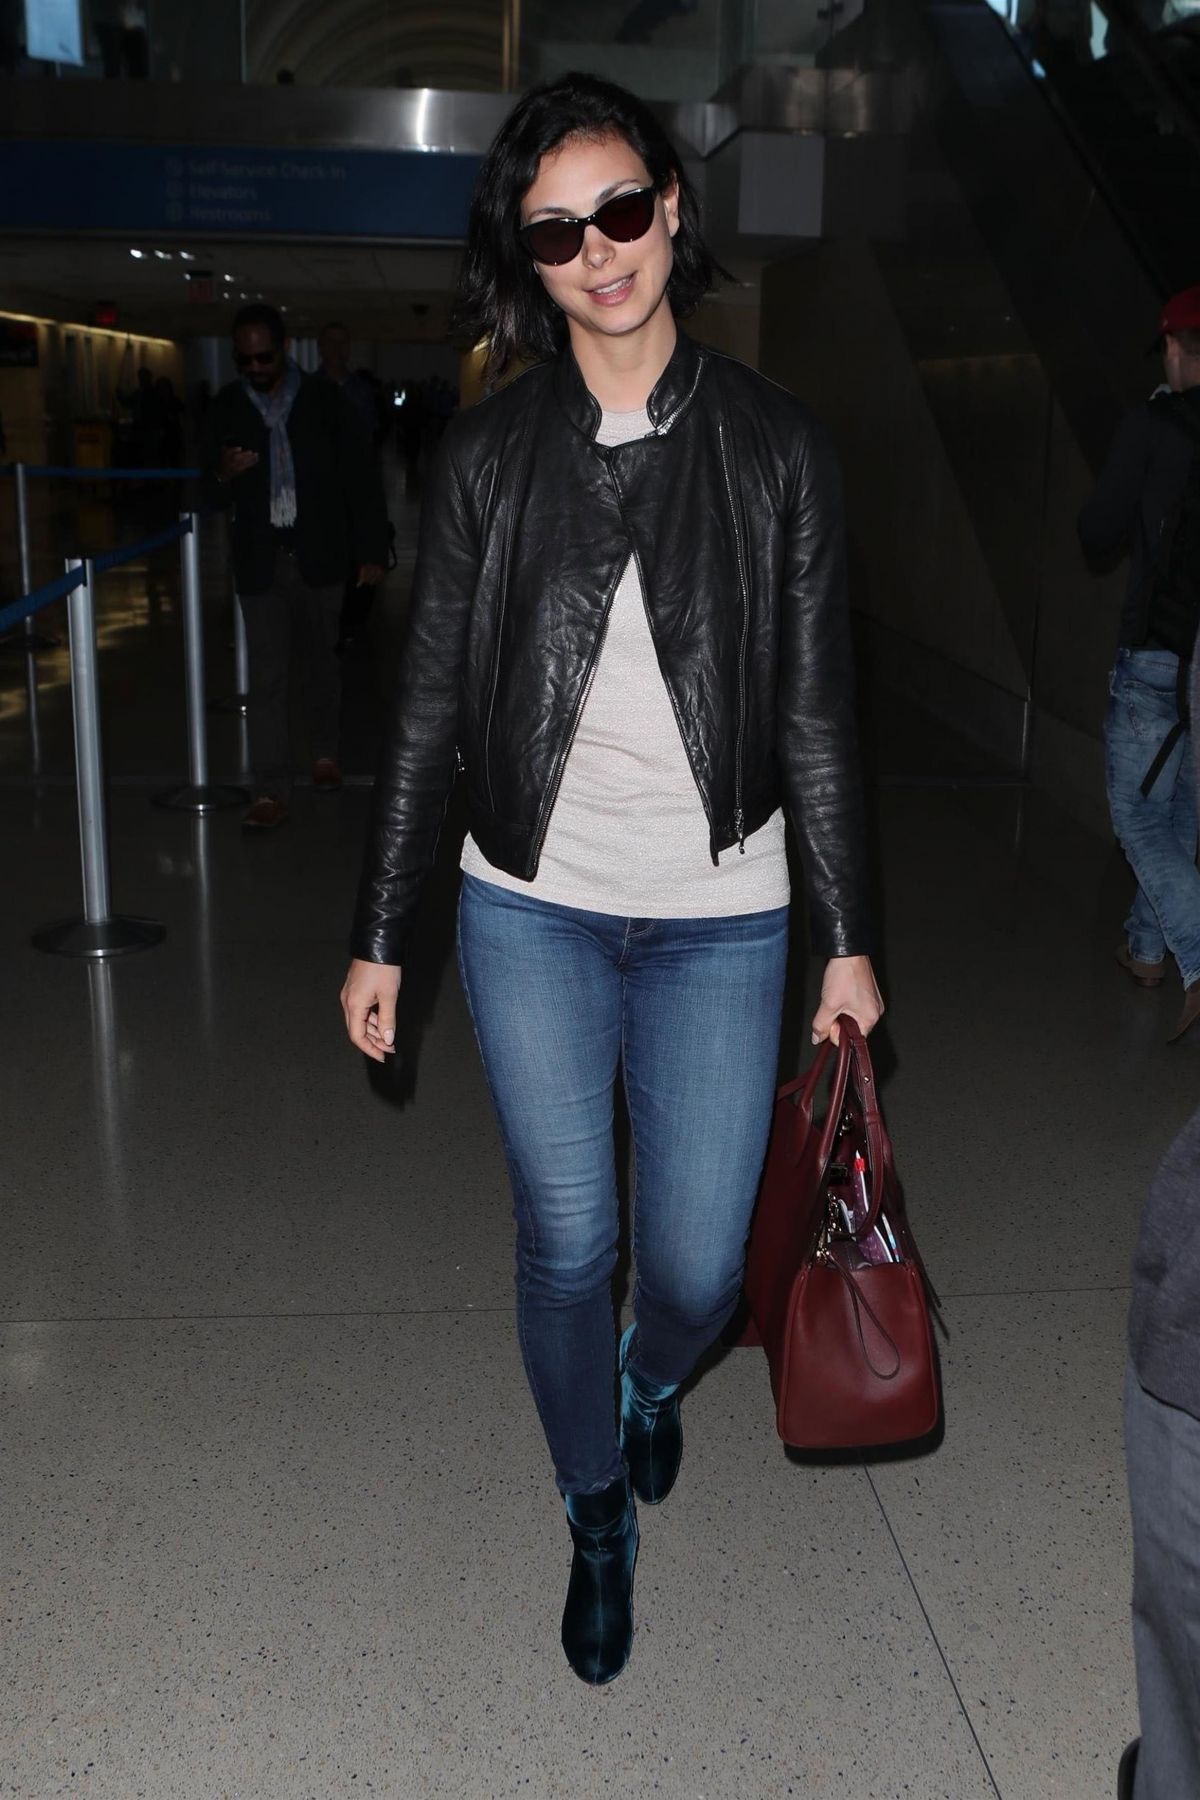 MORENA BACCARIN at LAX Airport in Los Angeles 05/17/2018 – HawtCelebs